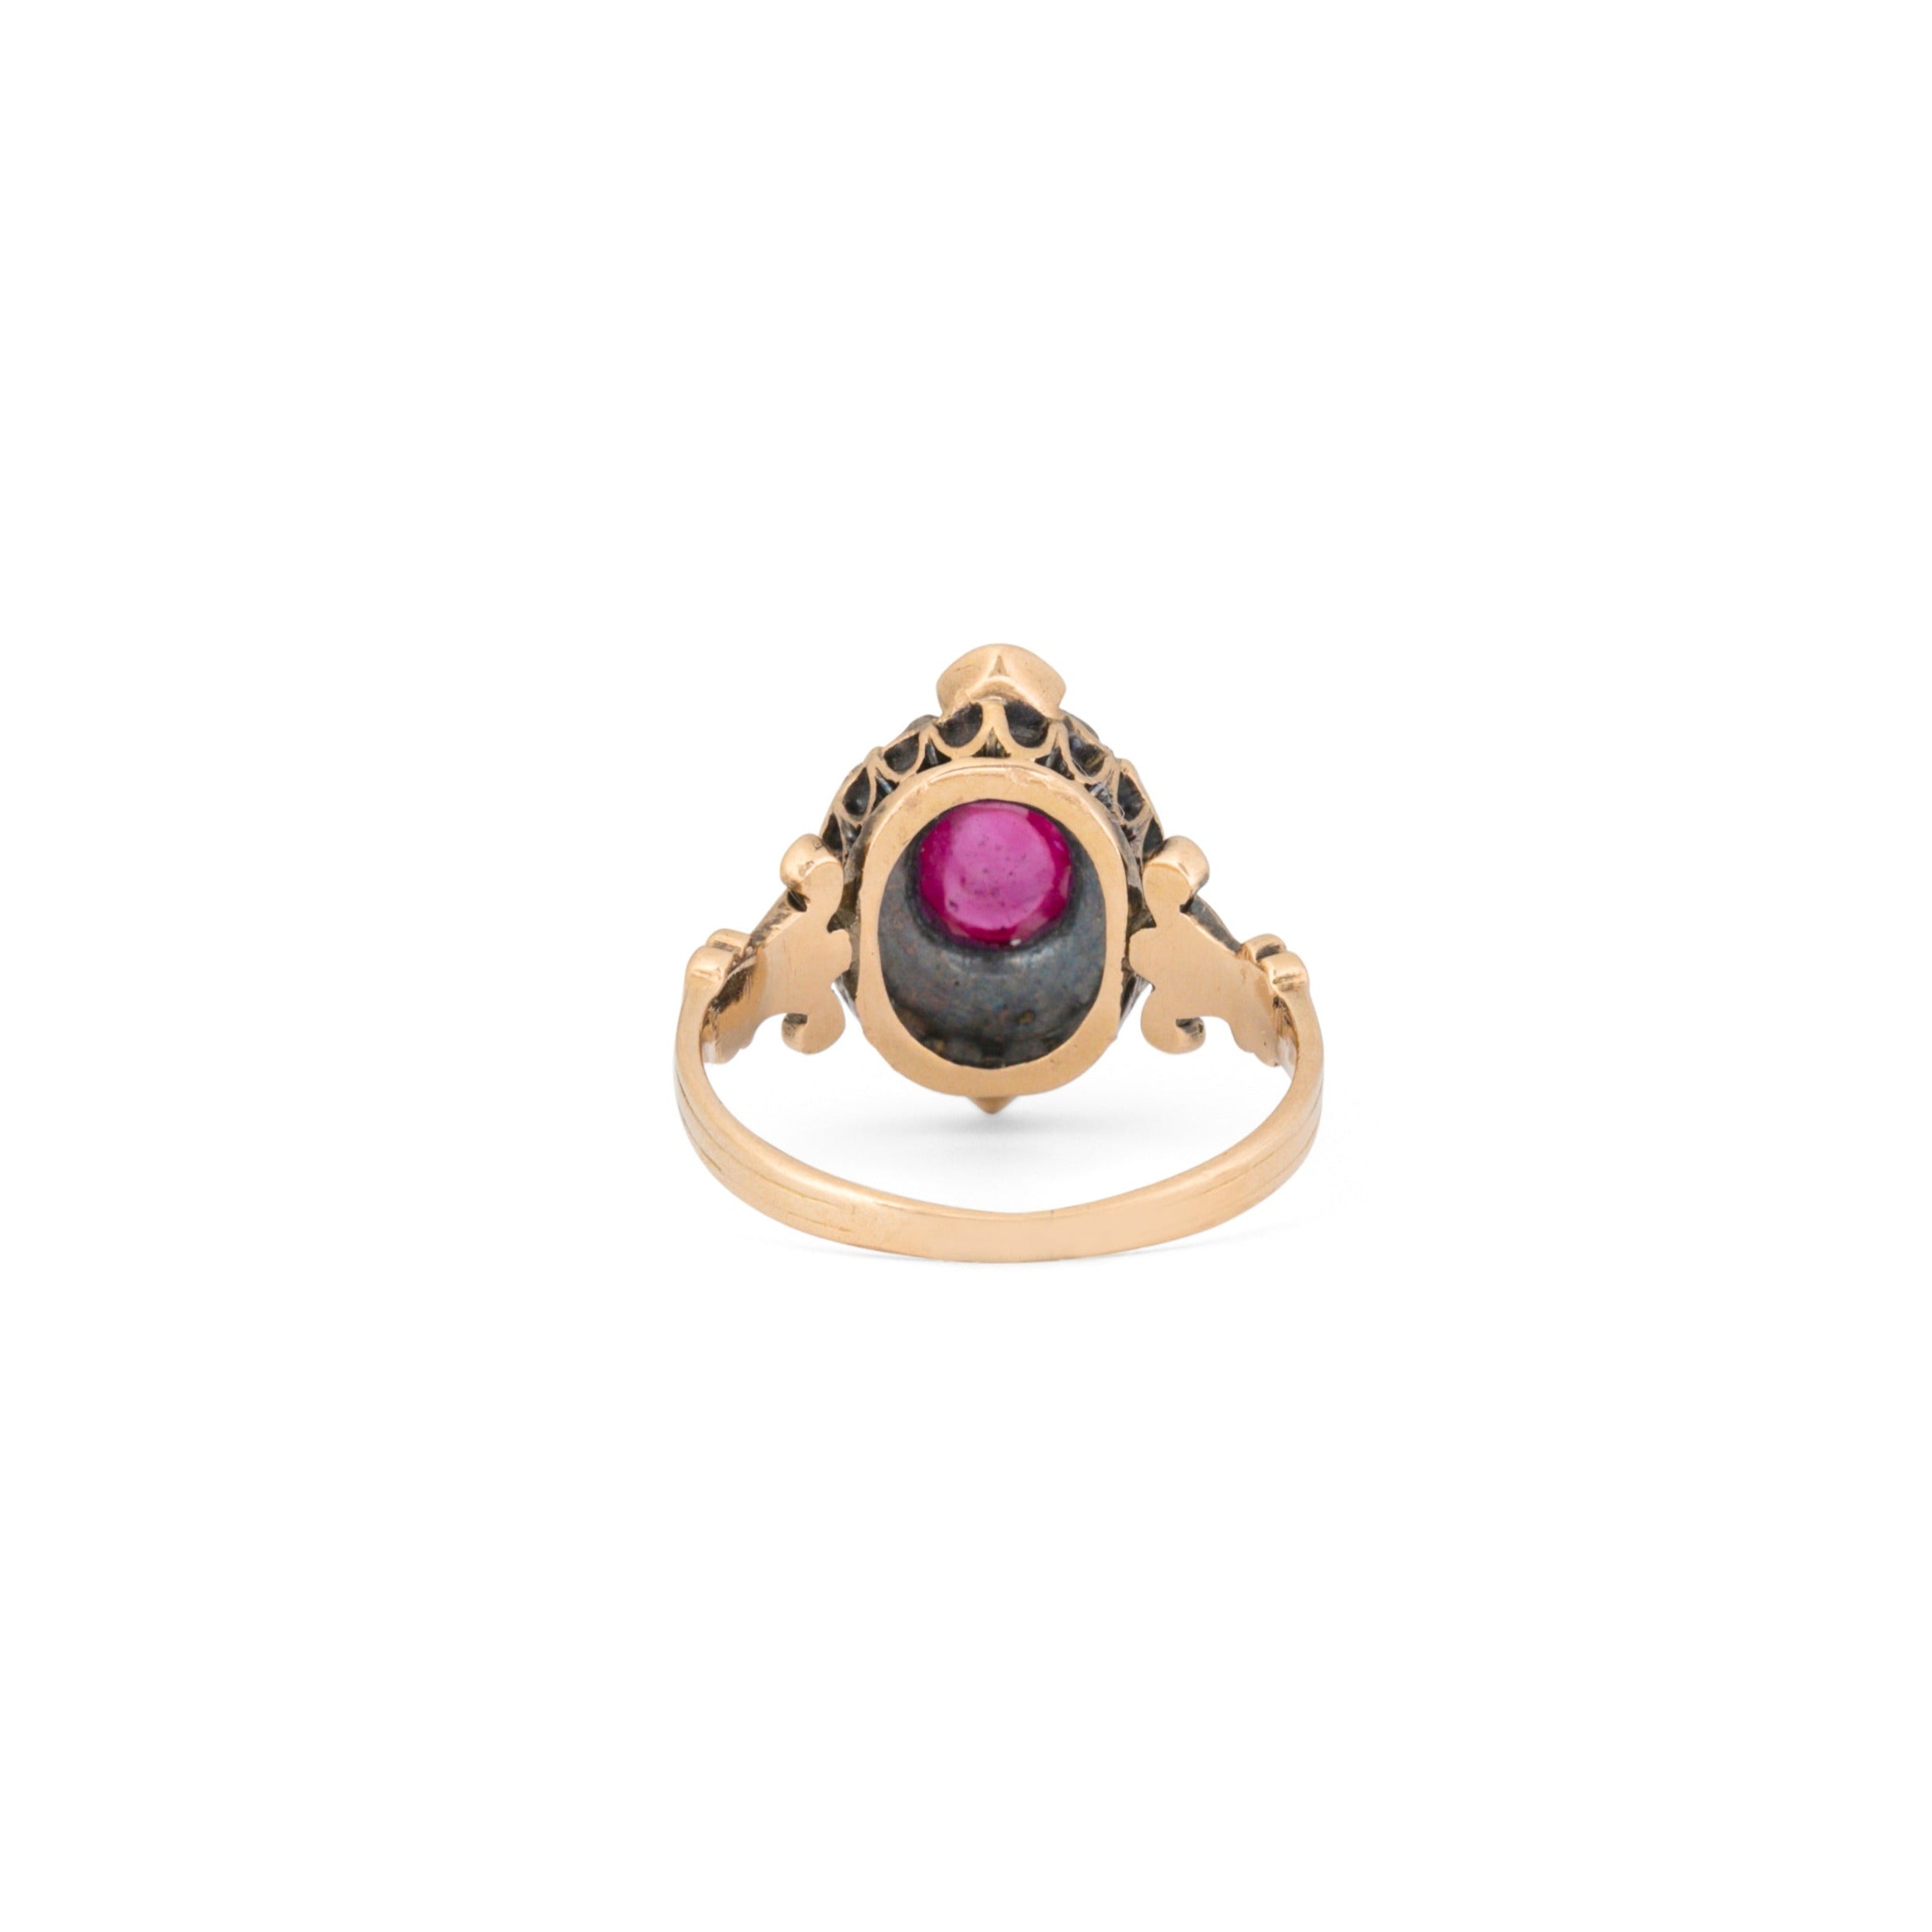 Victorian Ruby Cabochon, Diamond, and 14k Gold Ring